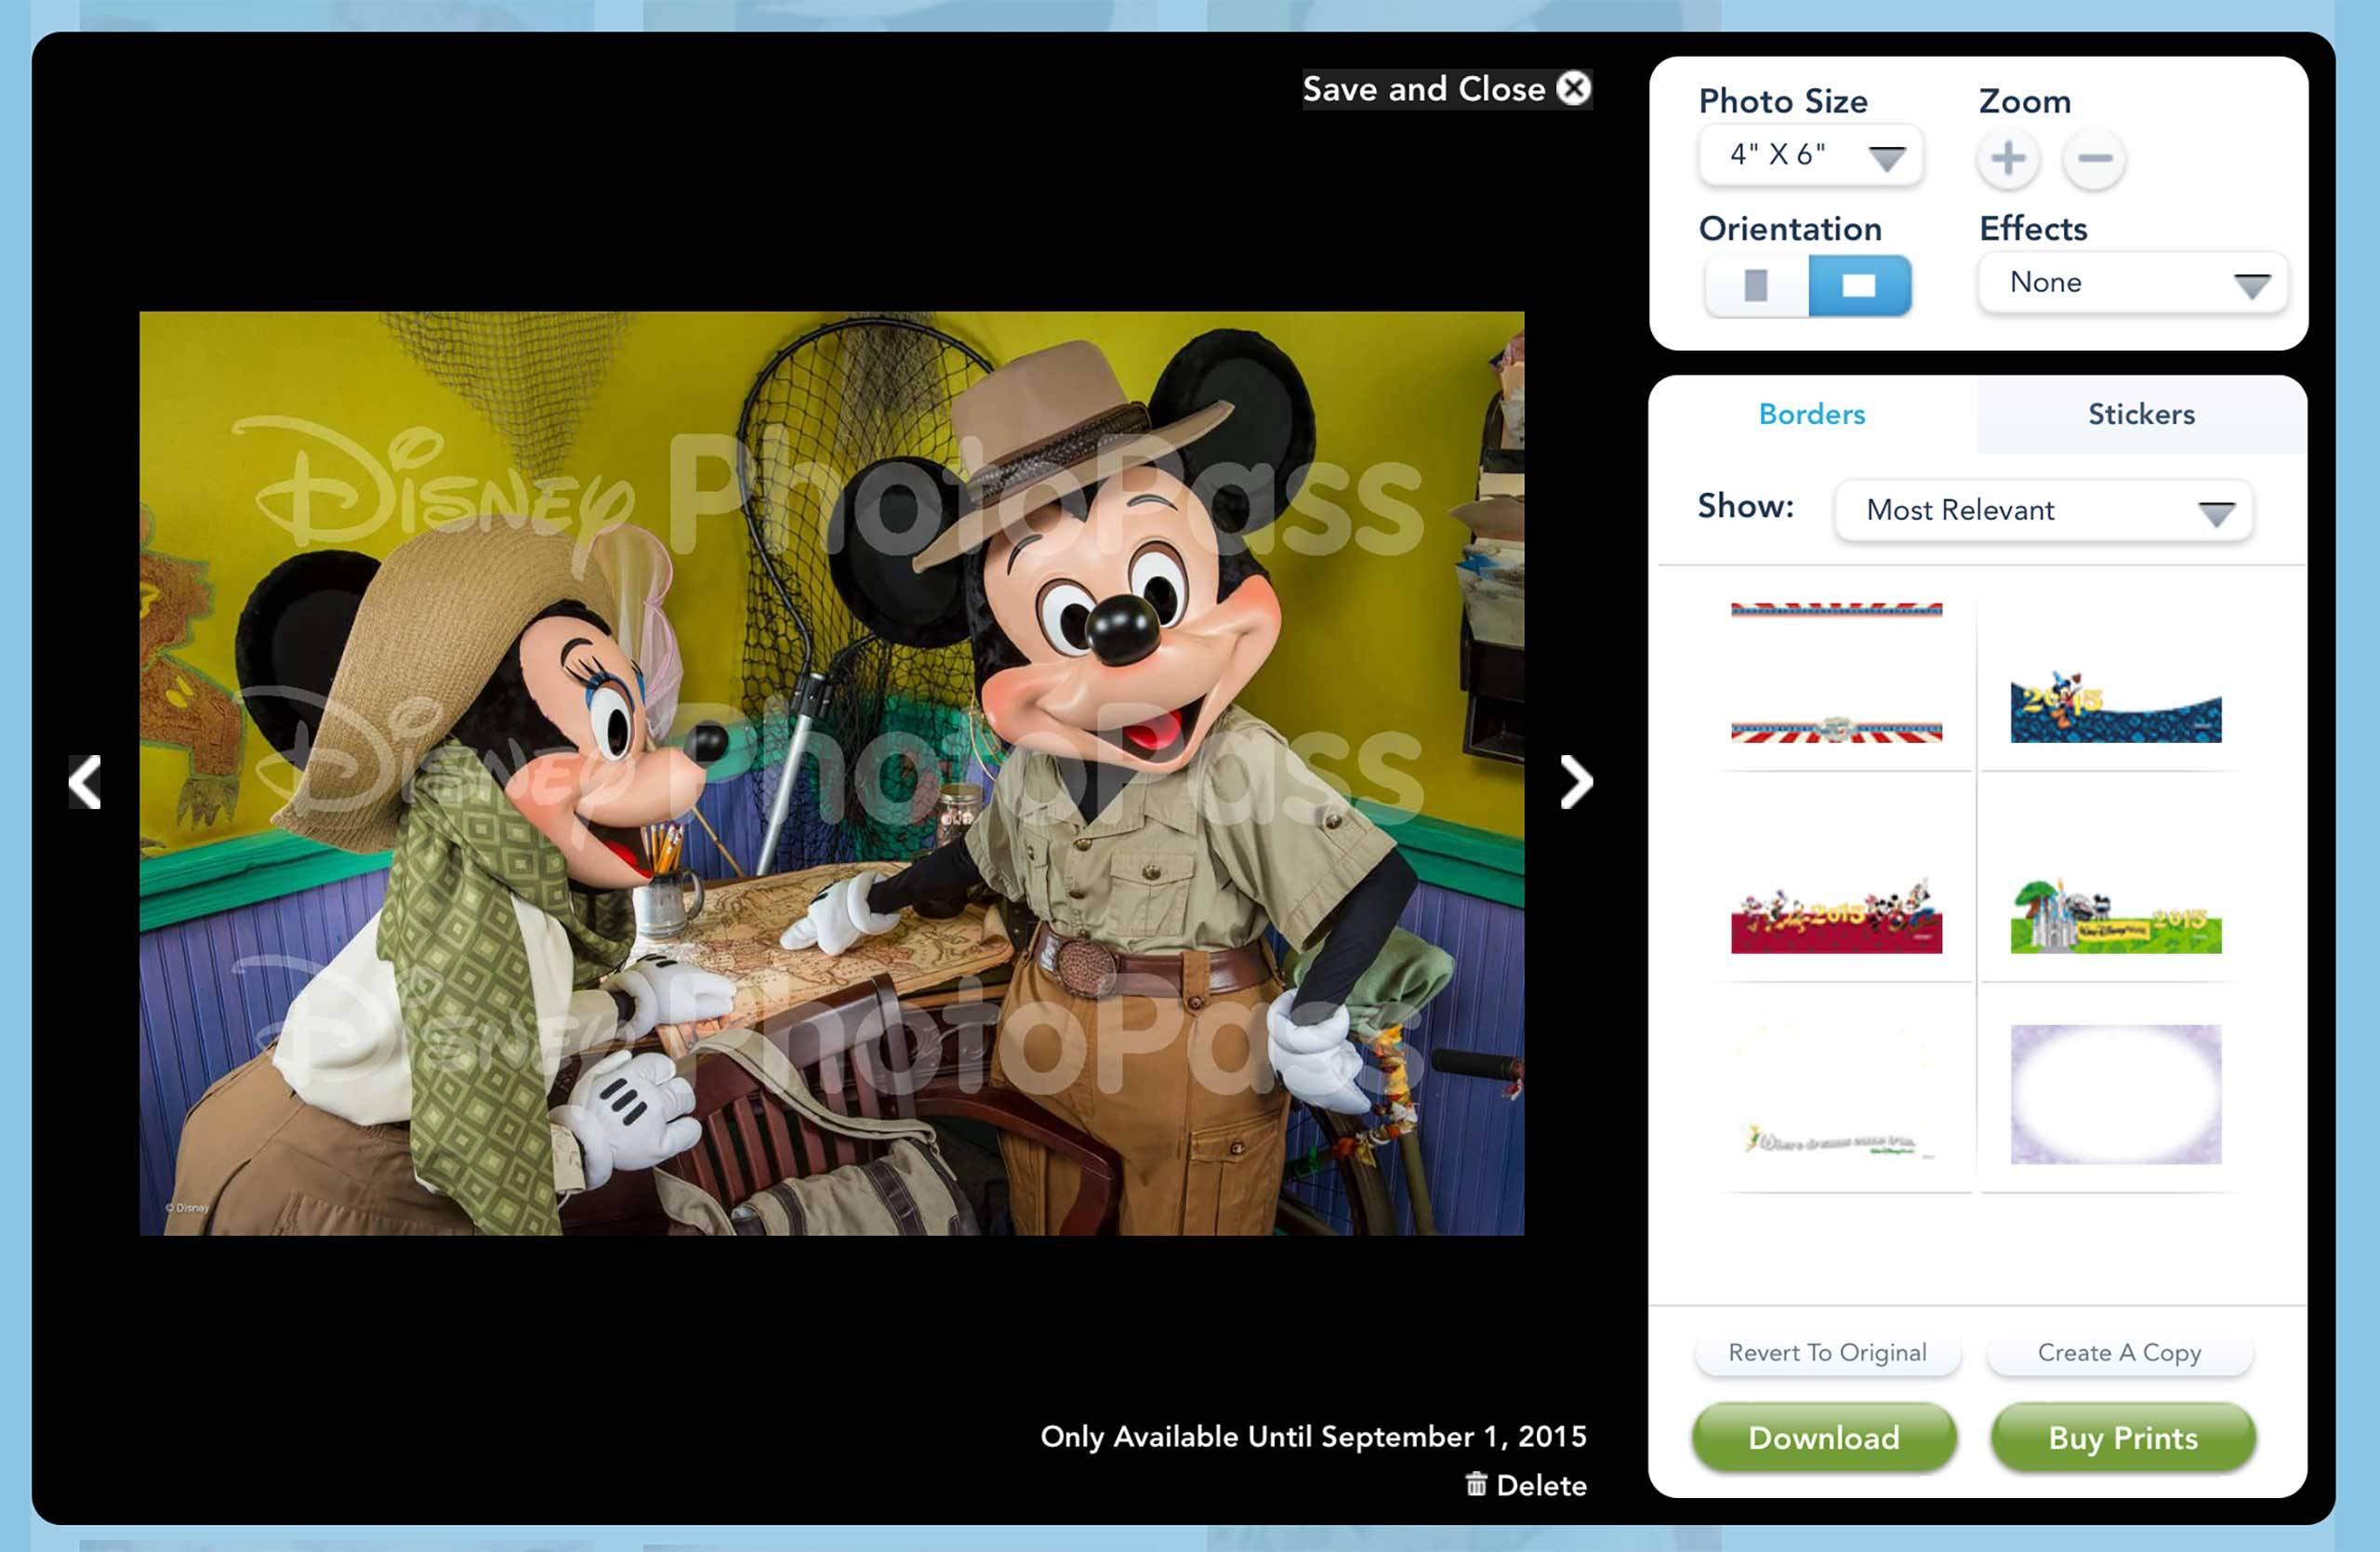 PhotoPass watermarked images